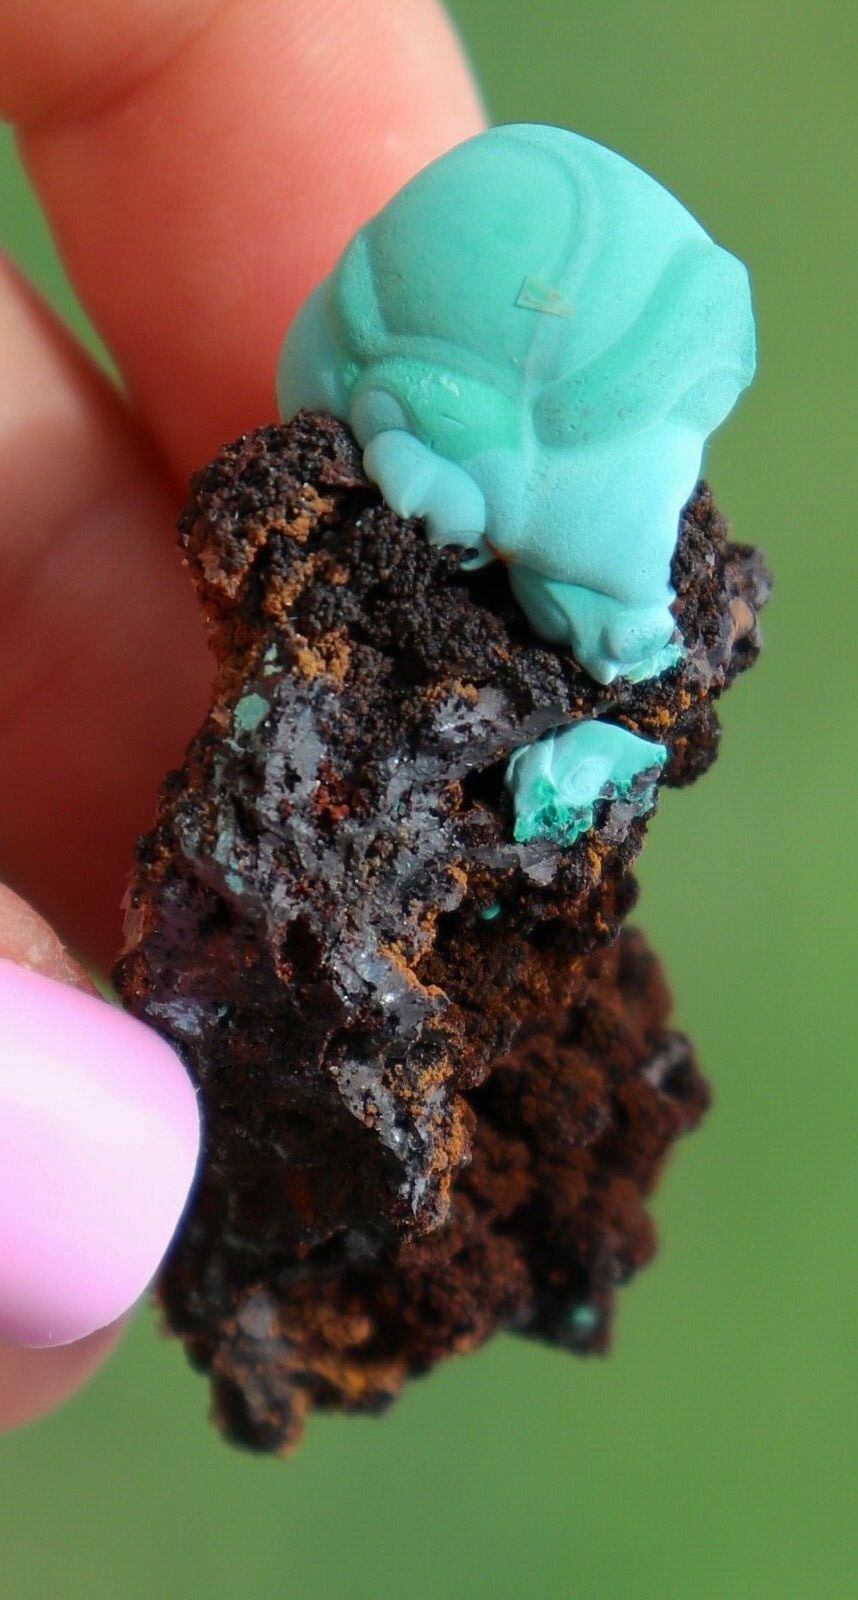 Rosasite On Malachite On Matrix, Electric Teal Blue Color,  Mexico